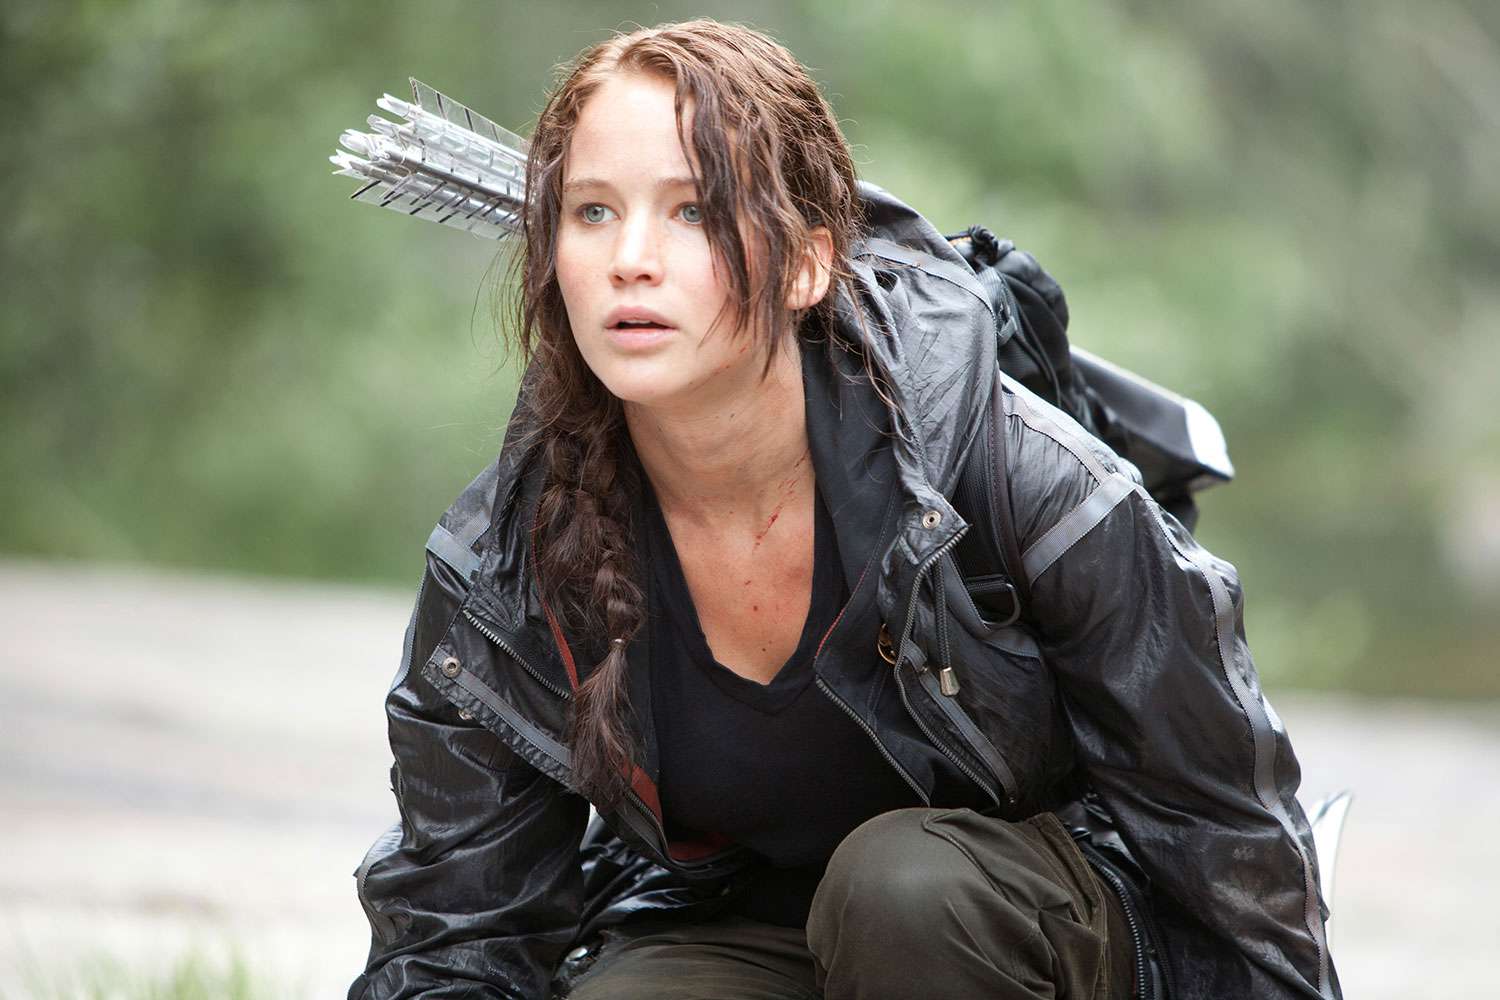 Editorial use only. No book cover usage. Mandatory Credit: Photo by Lionsgate/Kobal/Shutterstock (5885659a) Jennifer Lawrence The Hunger Games - 2012 Director: Gary Ross Lionsgate USA Scene Still